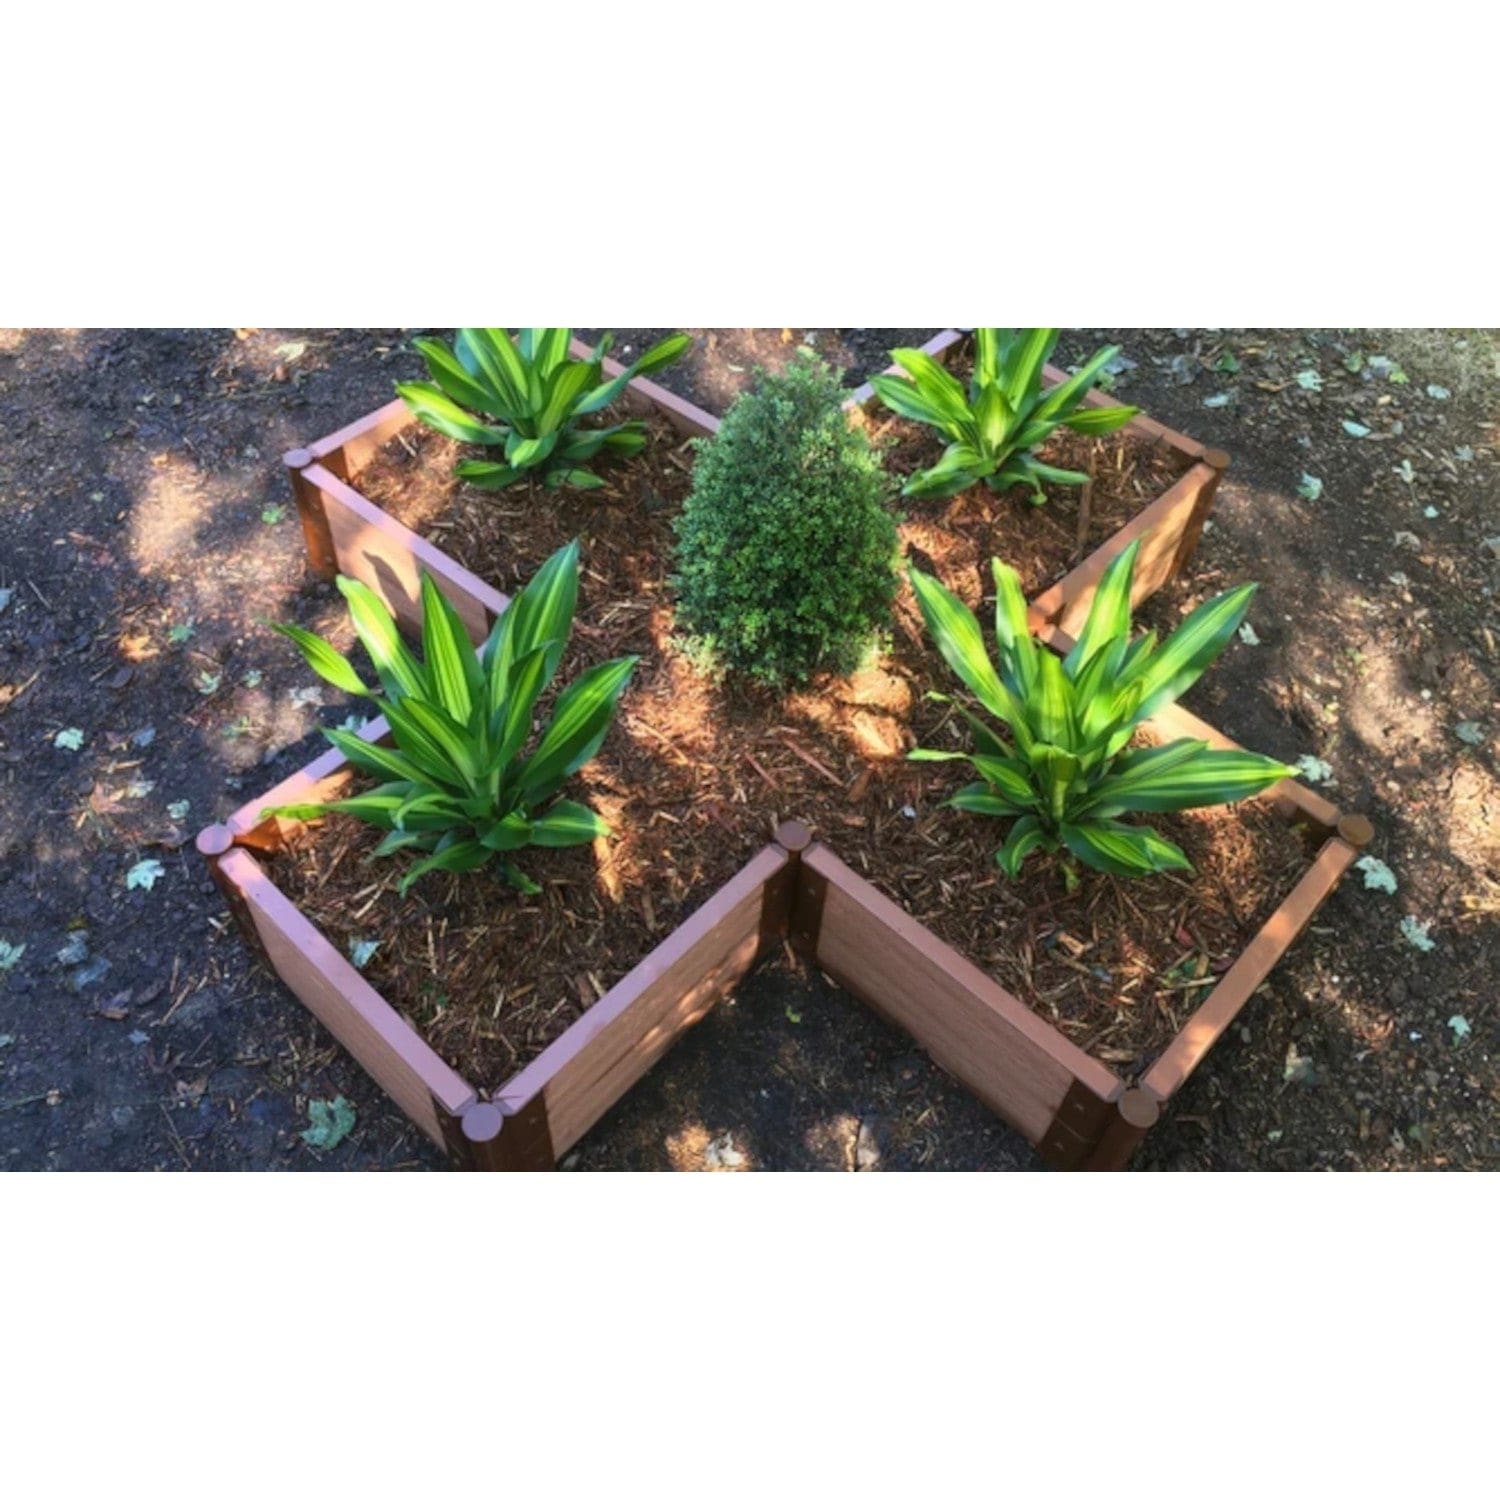 Frame It All Gardening Accessories Frame It All | Tool-Free Military Medallion Raised Garden Bed (Kit Cross) 6' X 6' X 11" - Weathered Wood - 1" Profile 200002485